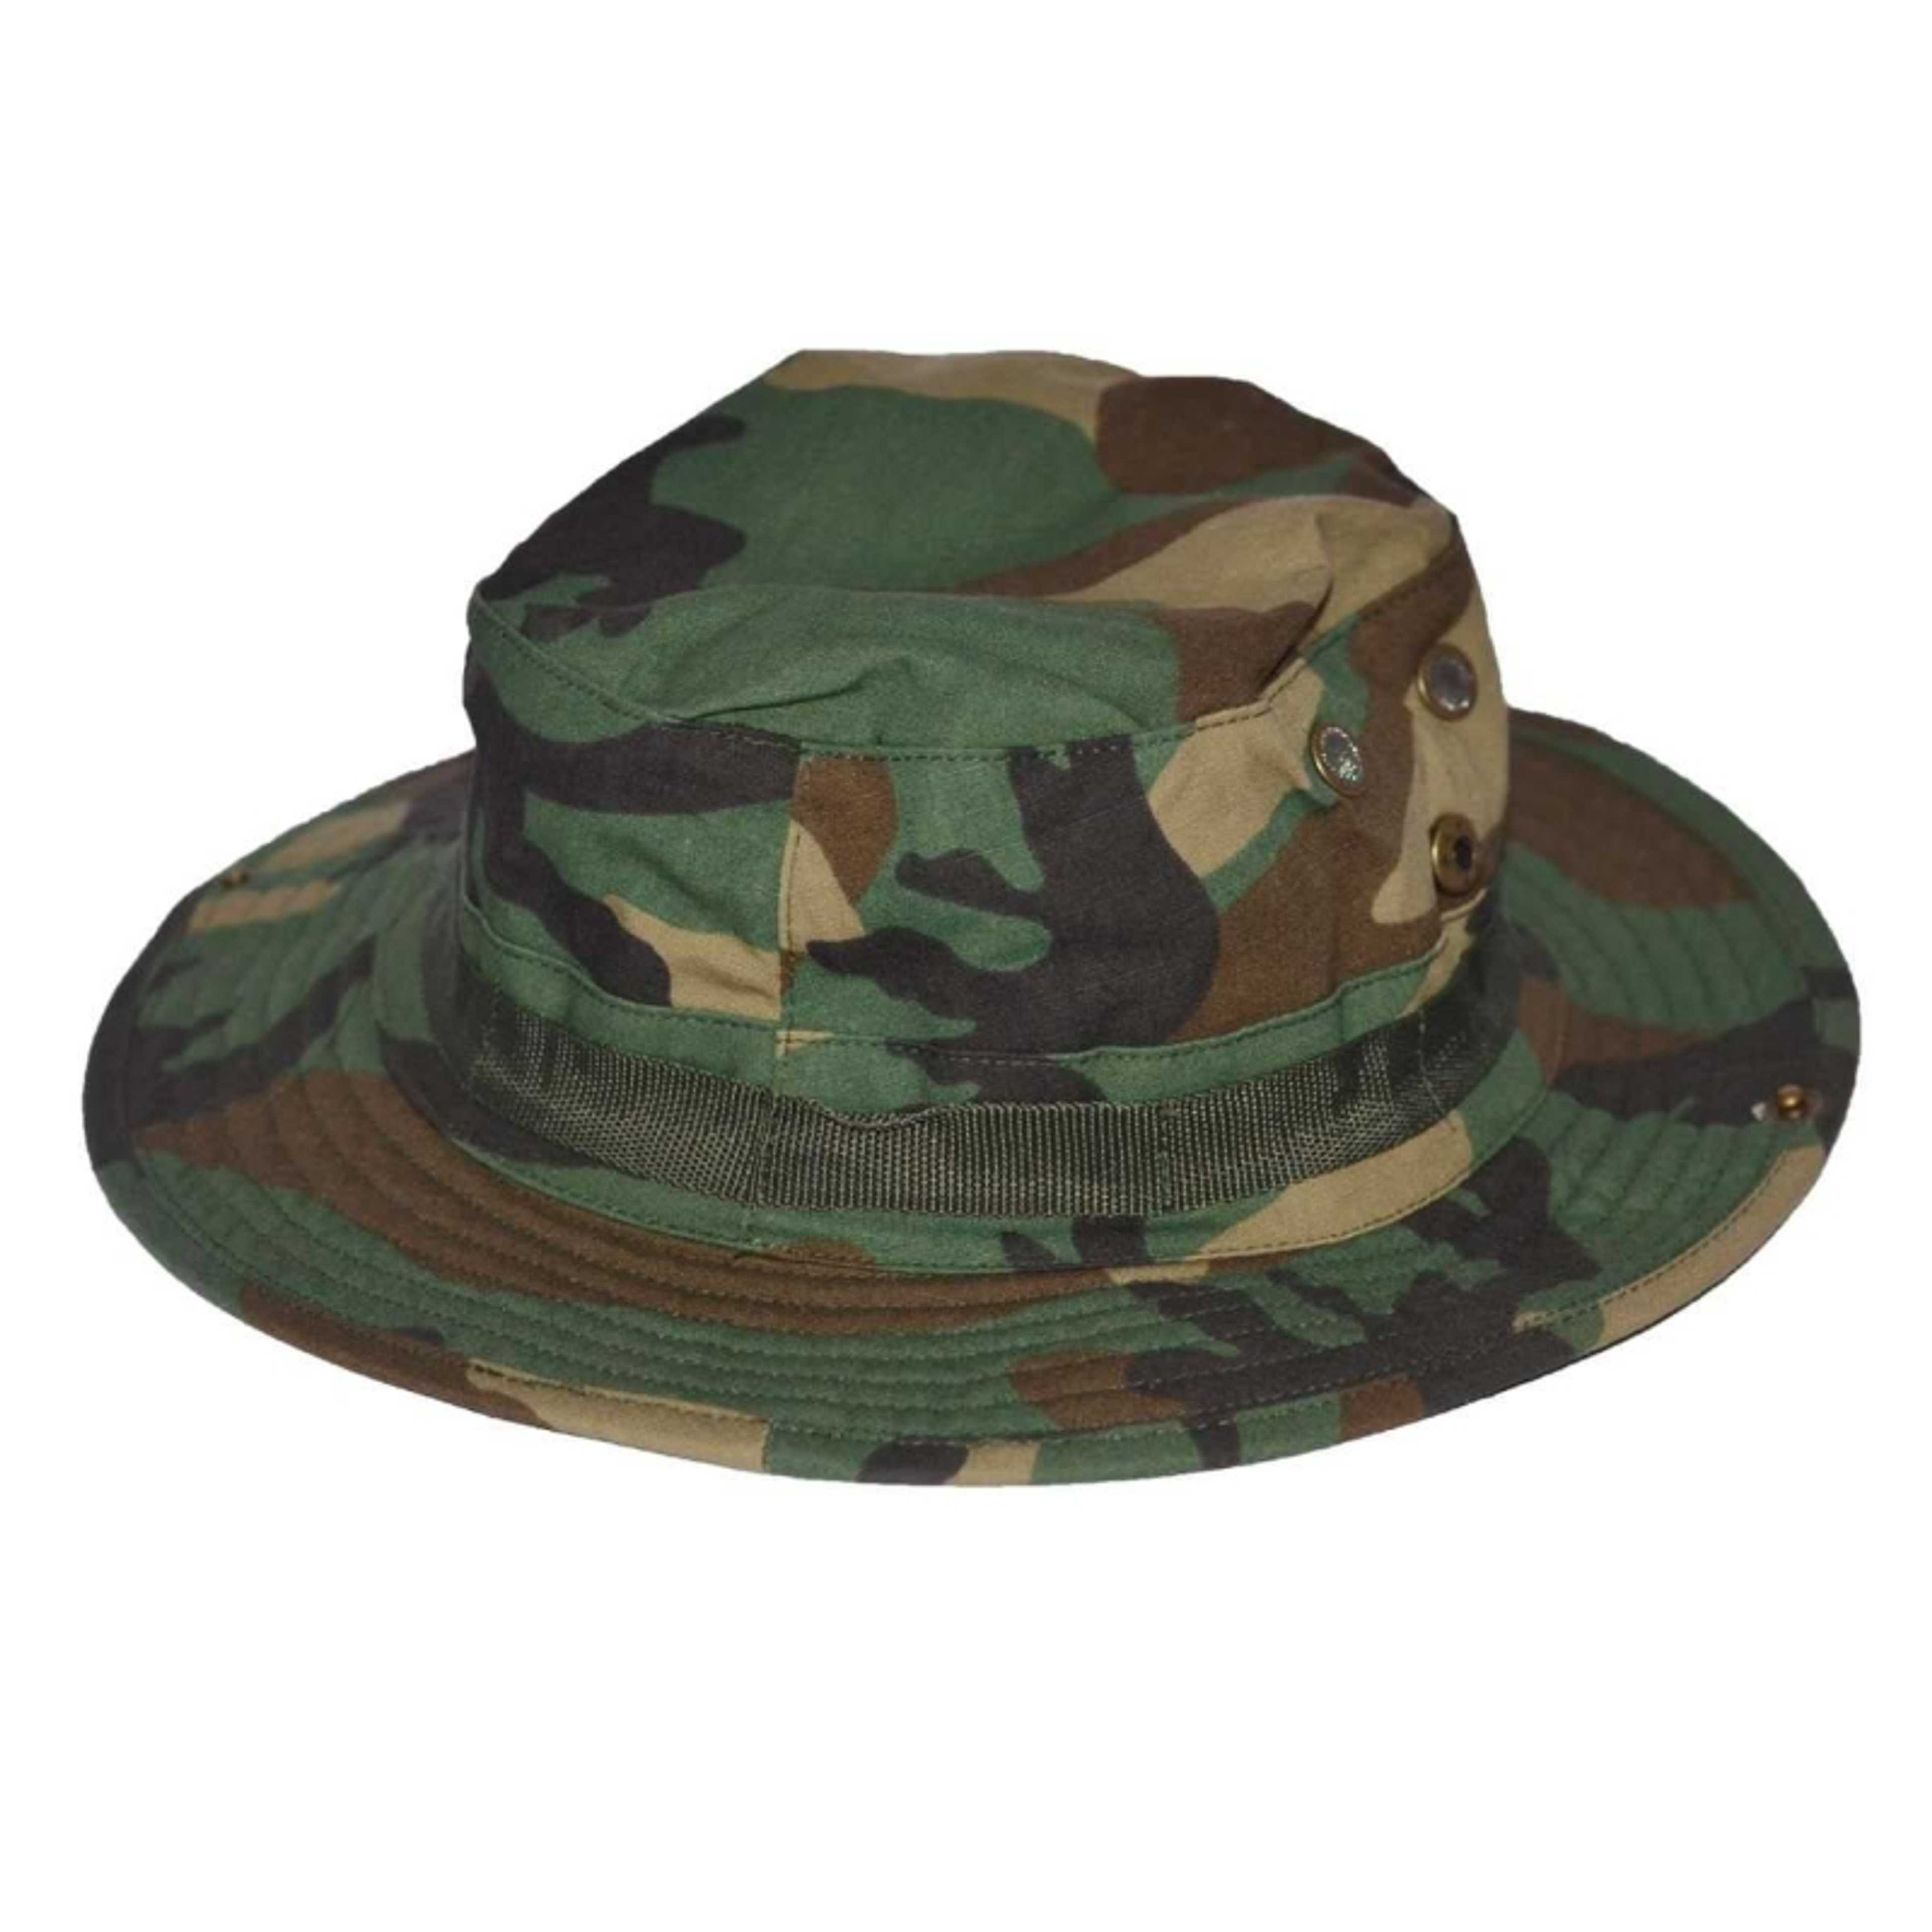 Army/Military - Boonie Hat For Outdoor Huntiing & Hiking